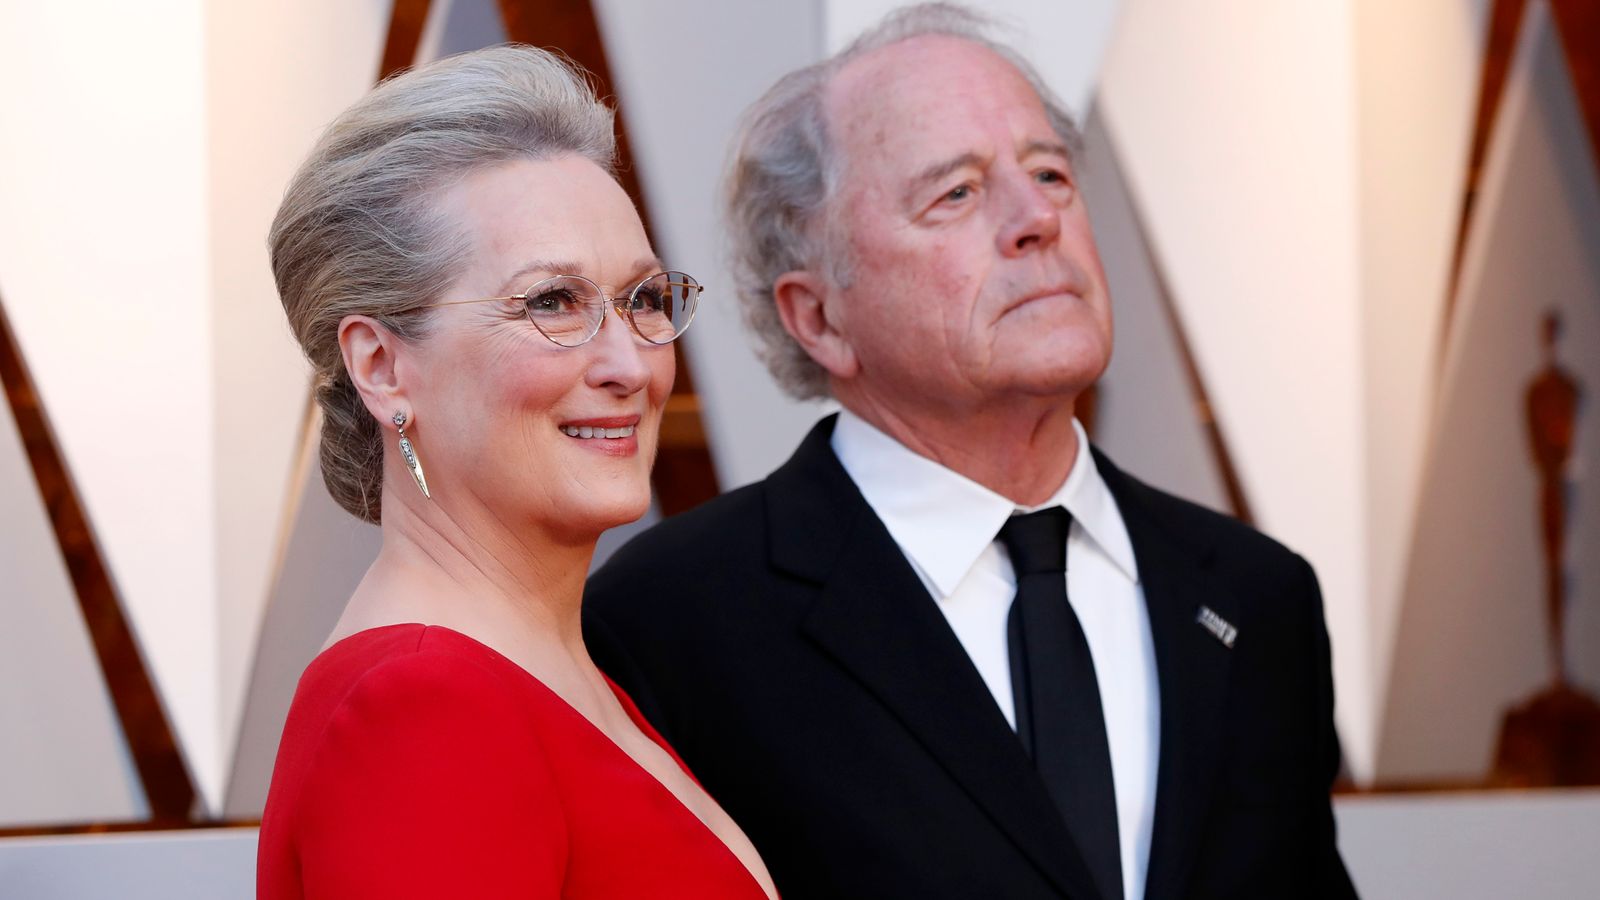 Meryl Streep and husband of 45 years Dom Gummer have separated